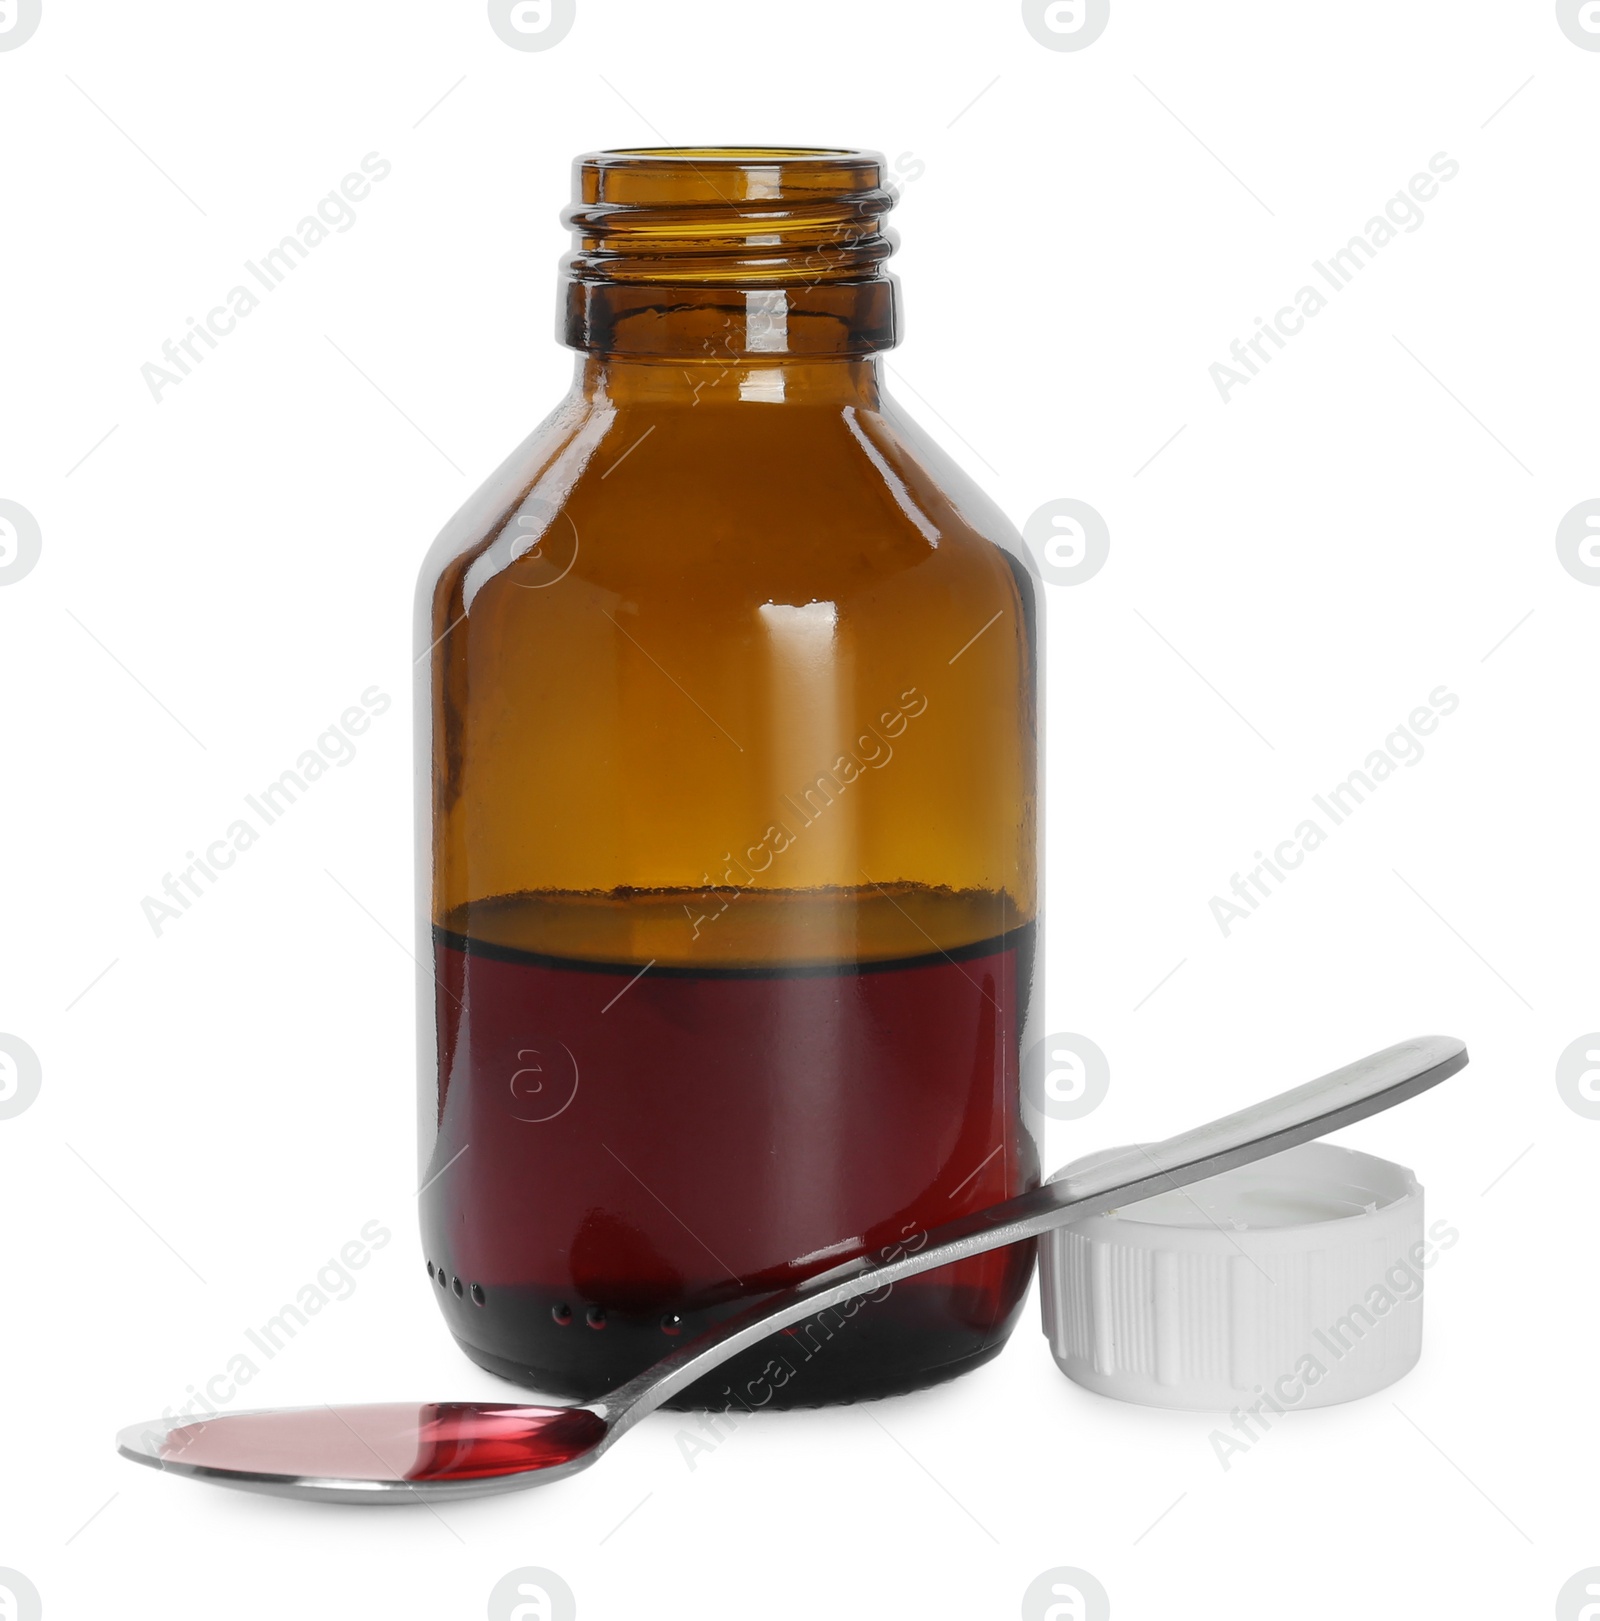 Photo of Bottle of cough syrup and spoon on white background